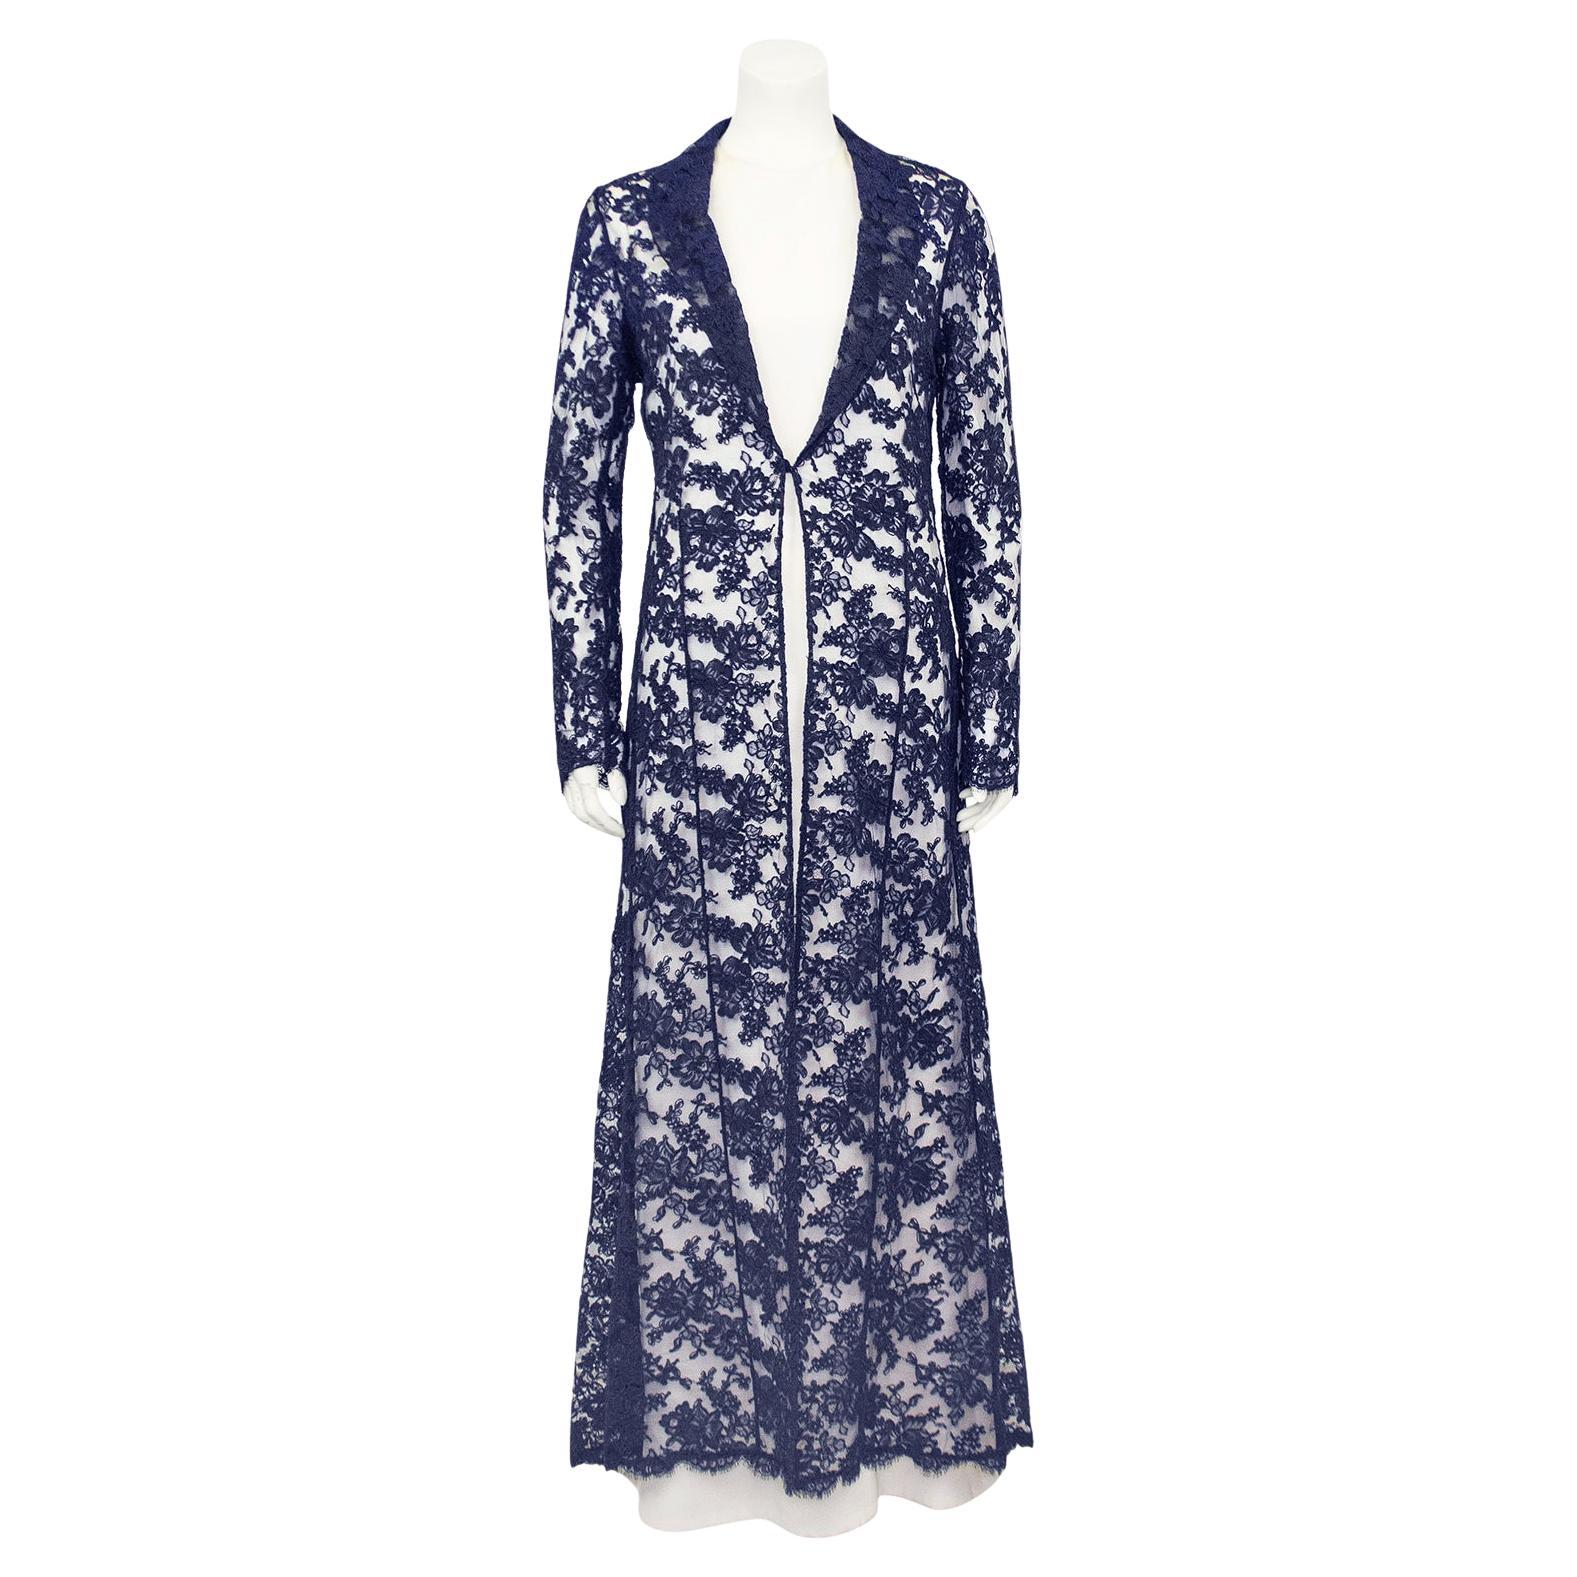 1980s Bill Blass Off White Gown and Navy Lace Evening Ensemble